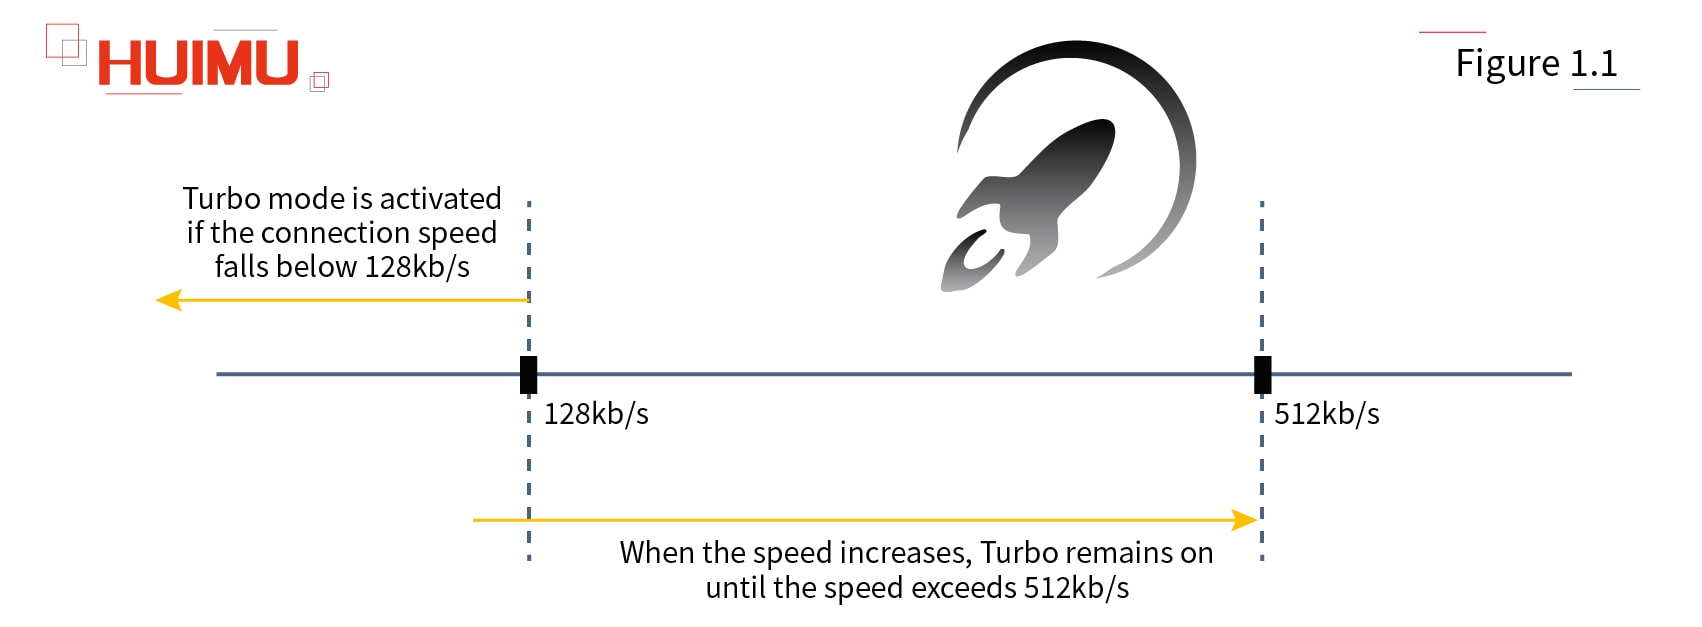 There are two thresholds that determine when Turbo mode switches on and off. More detail via www.@huimultd.com